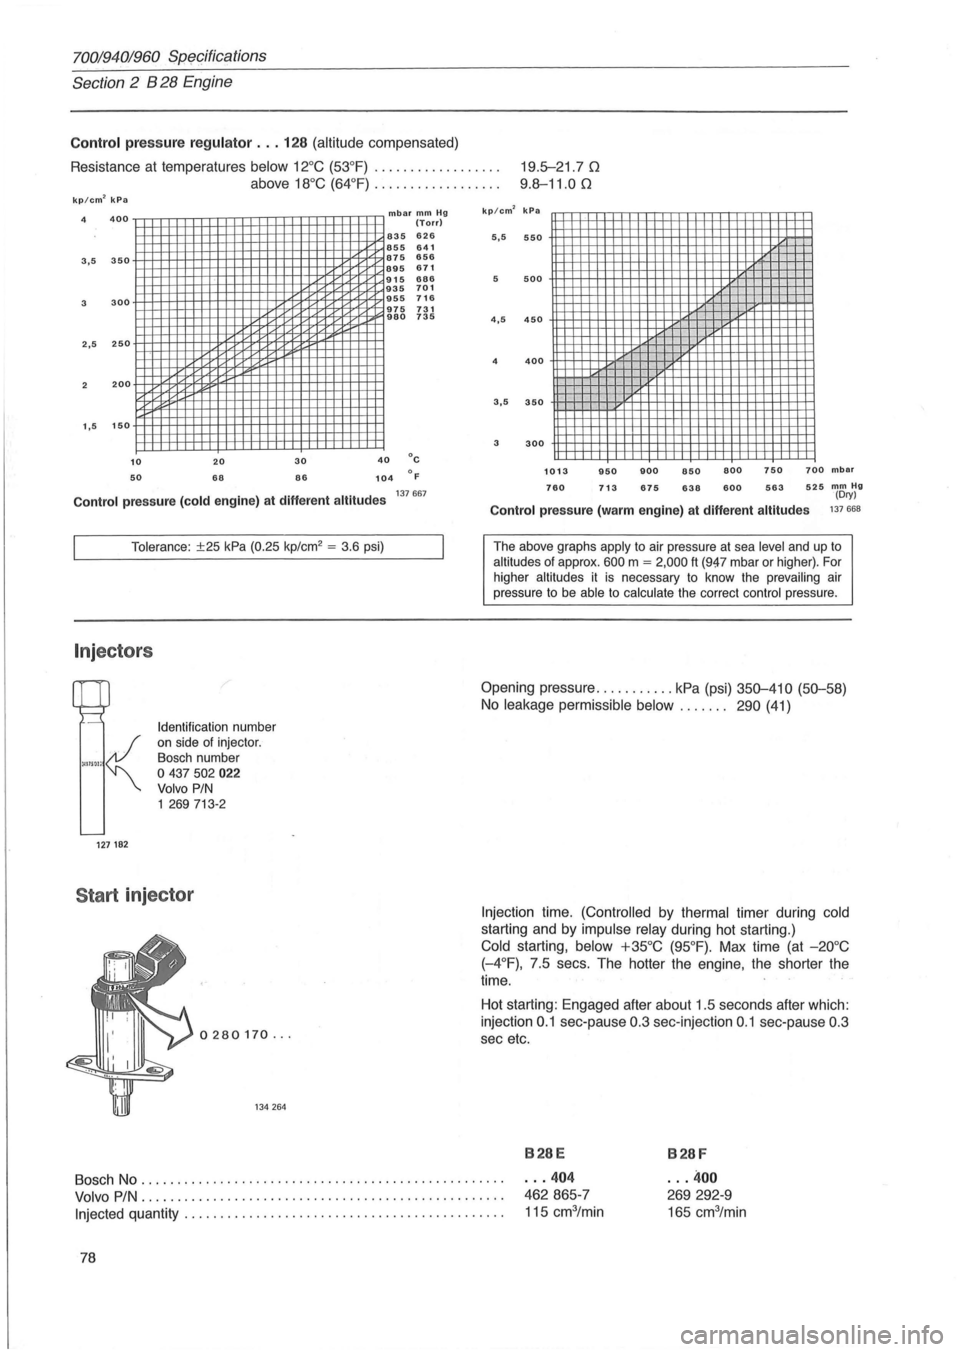 VOLVO 960 1982  Service Repair Manual 70019401960 Sp~cifications 
Section 2 B 28 Engine 
Control pressure regulator ... 128 (altitude compensated) 
Resistance  at temperatures 
below  12°C (53°F) ................. . 19.5-21 .70 
9.8-11.